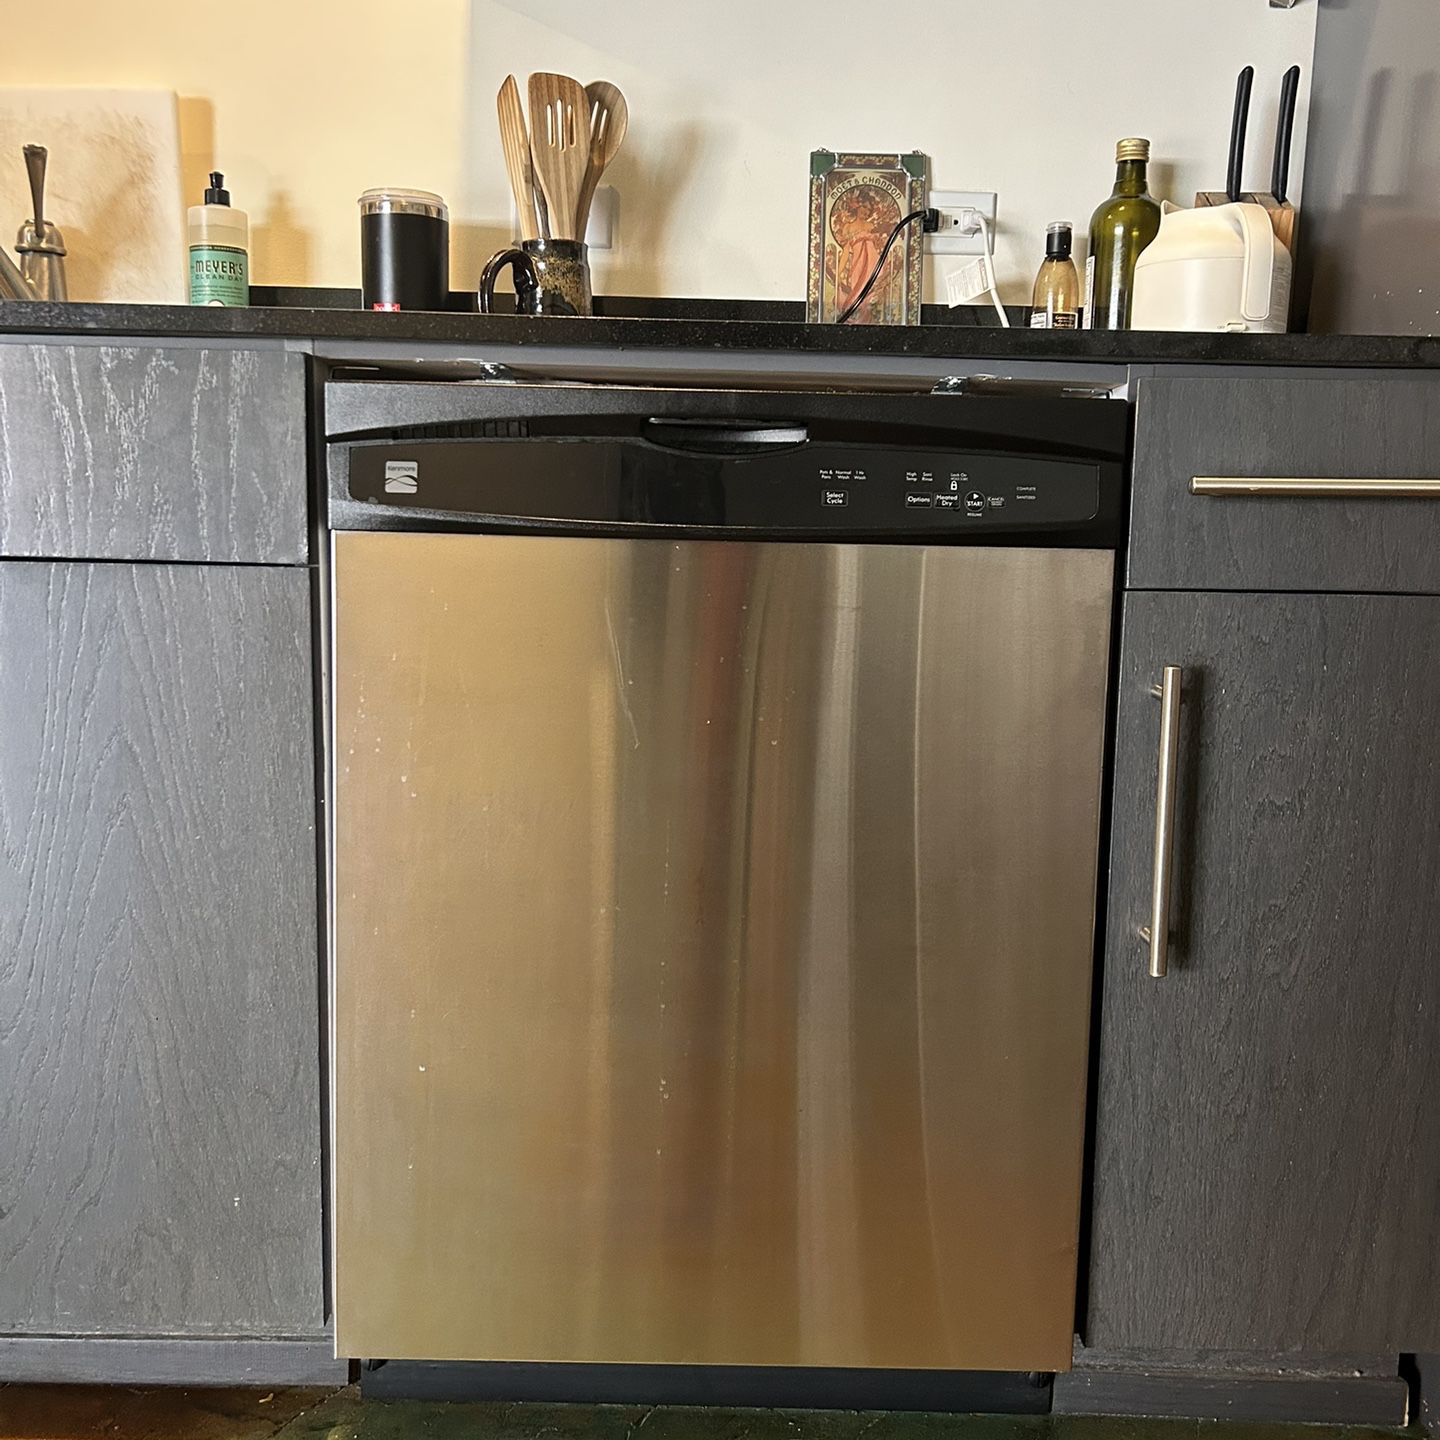 Great Dishwasher for less than $100